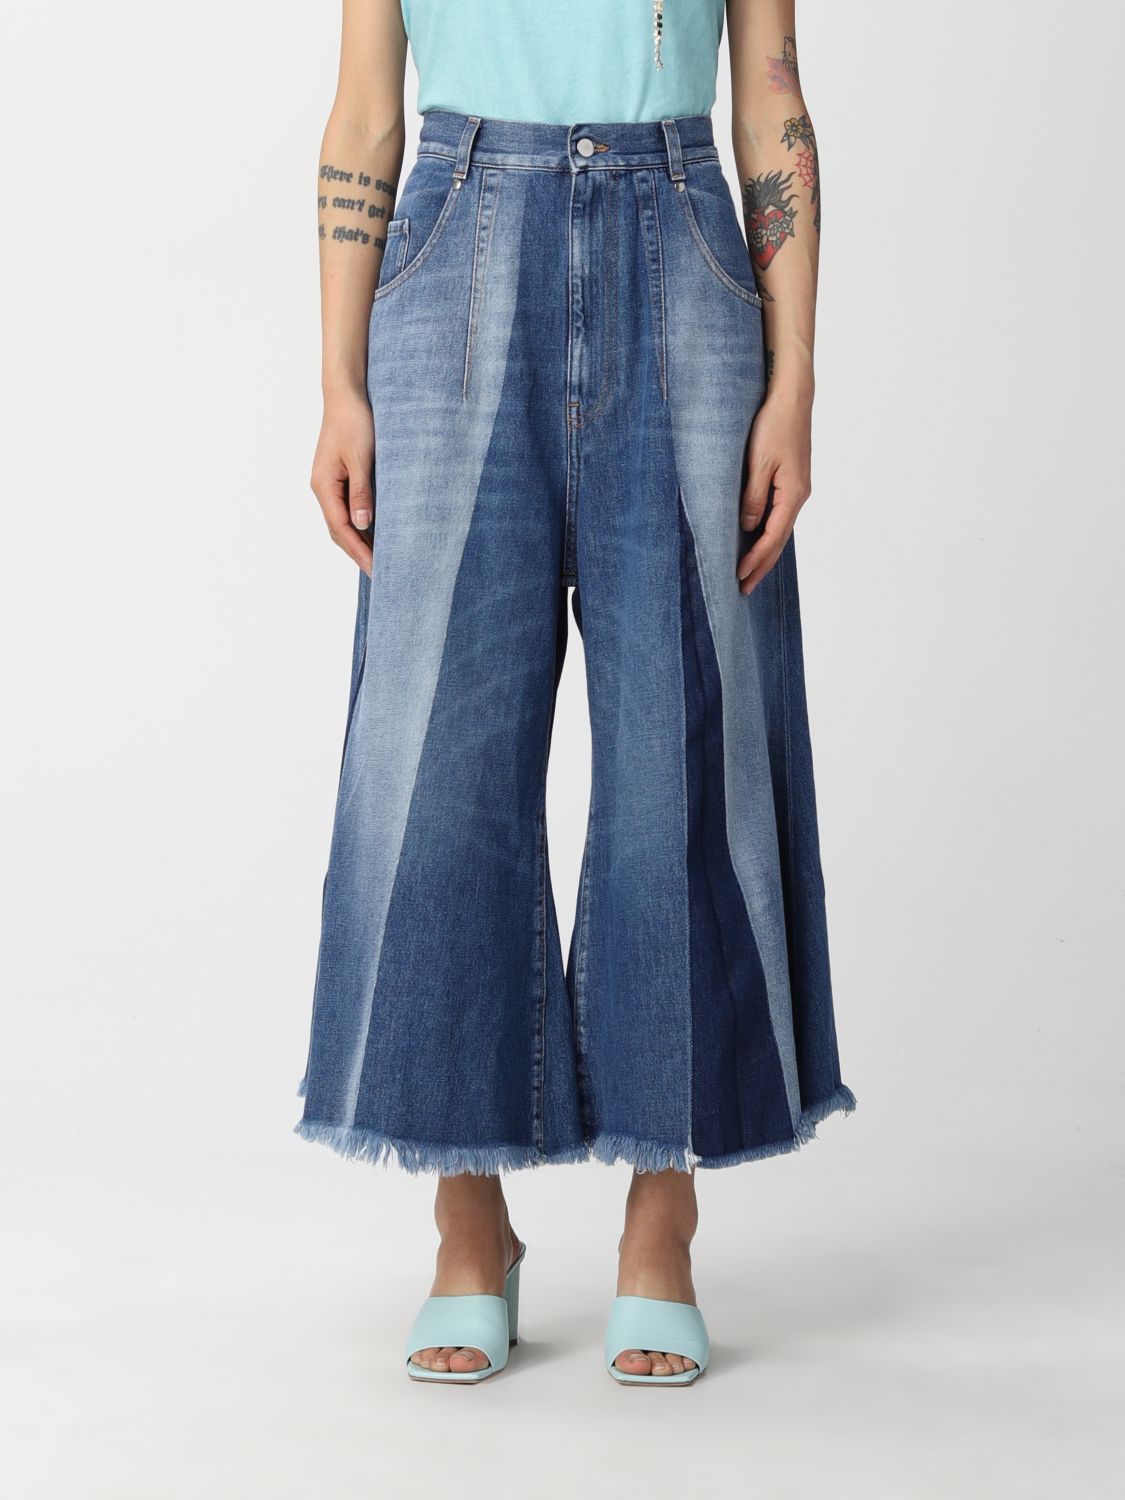 Jeans Circus Hotel: Jeans cropped Circus Hotel in denim washed denim 1